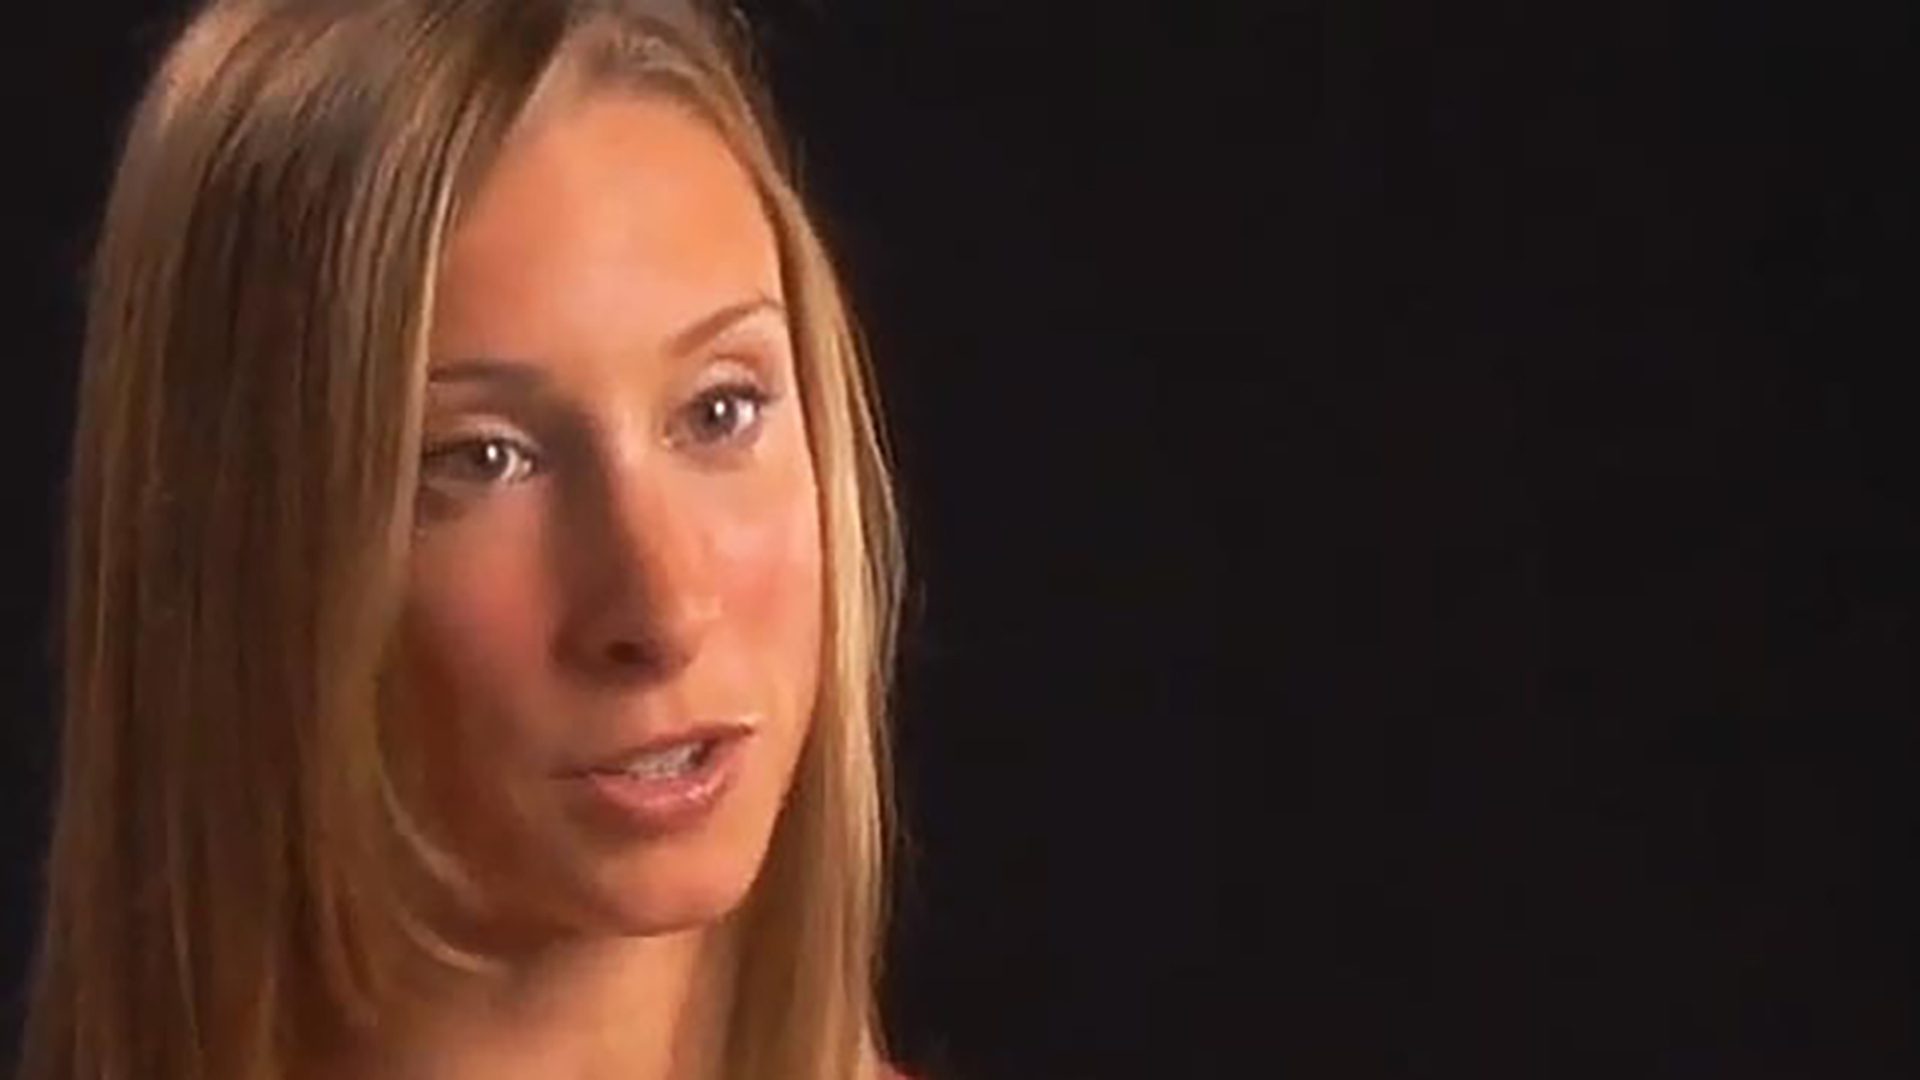 A young blonde woman is interviewed against a black background